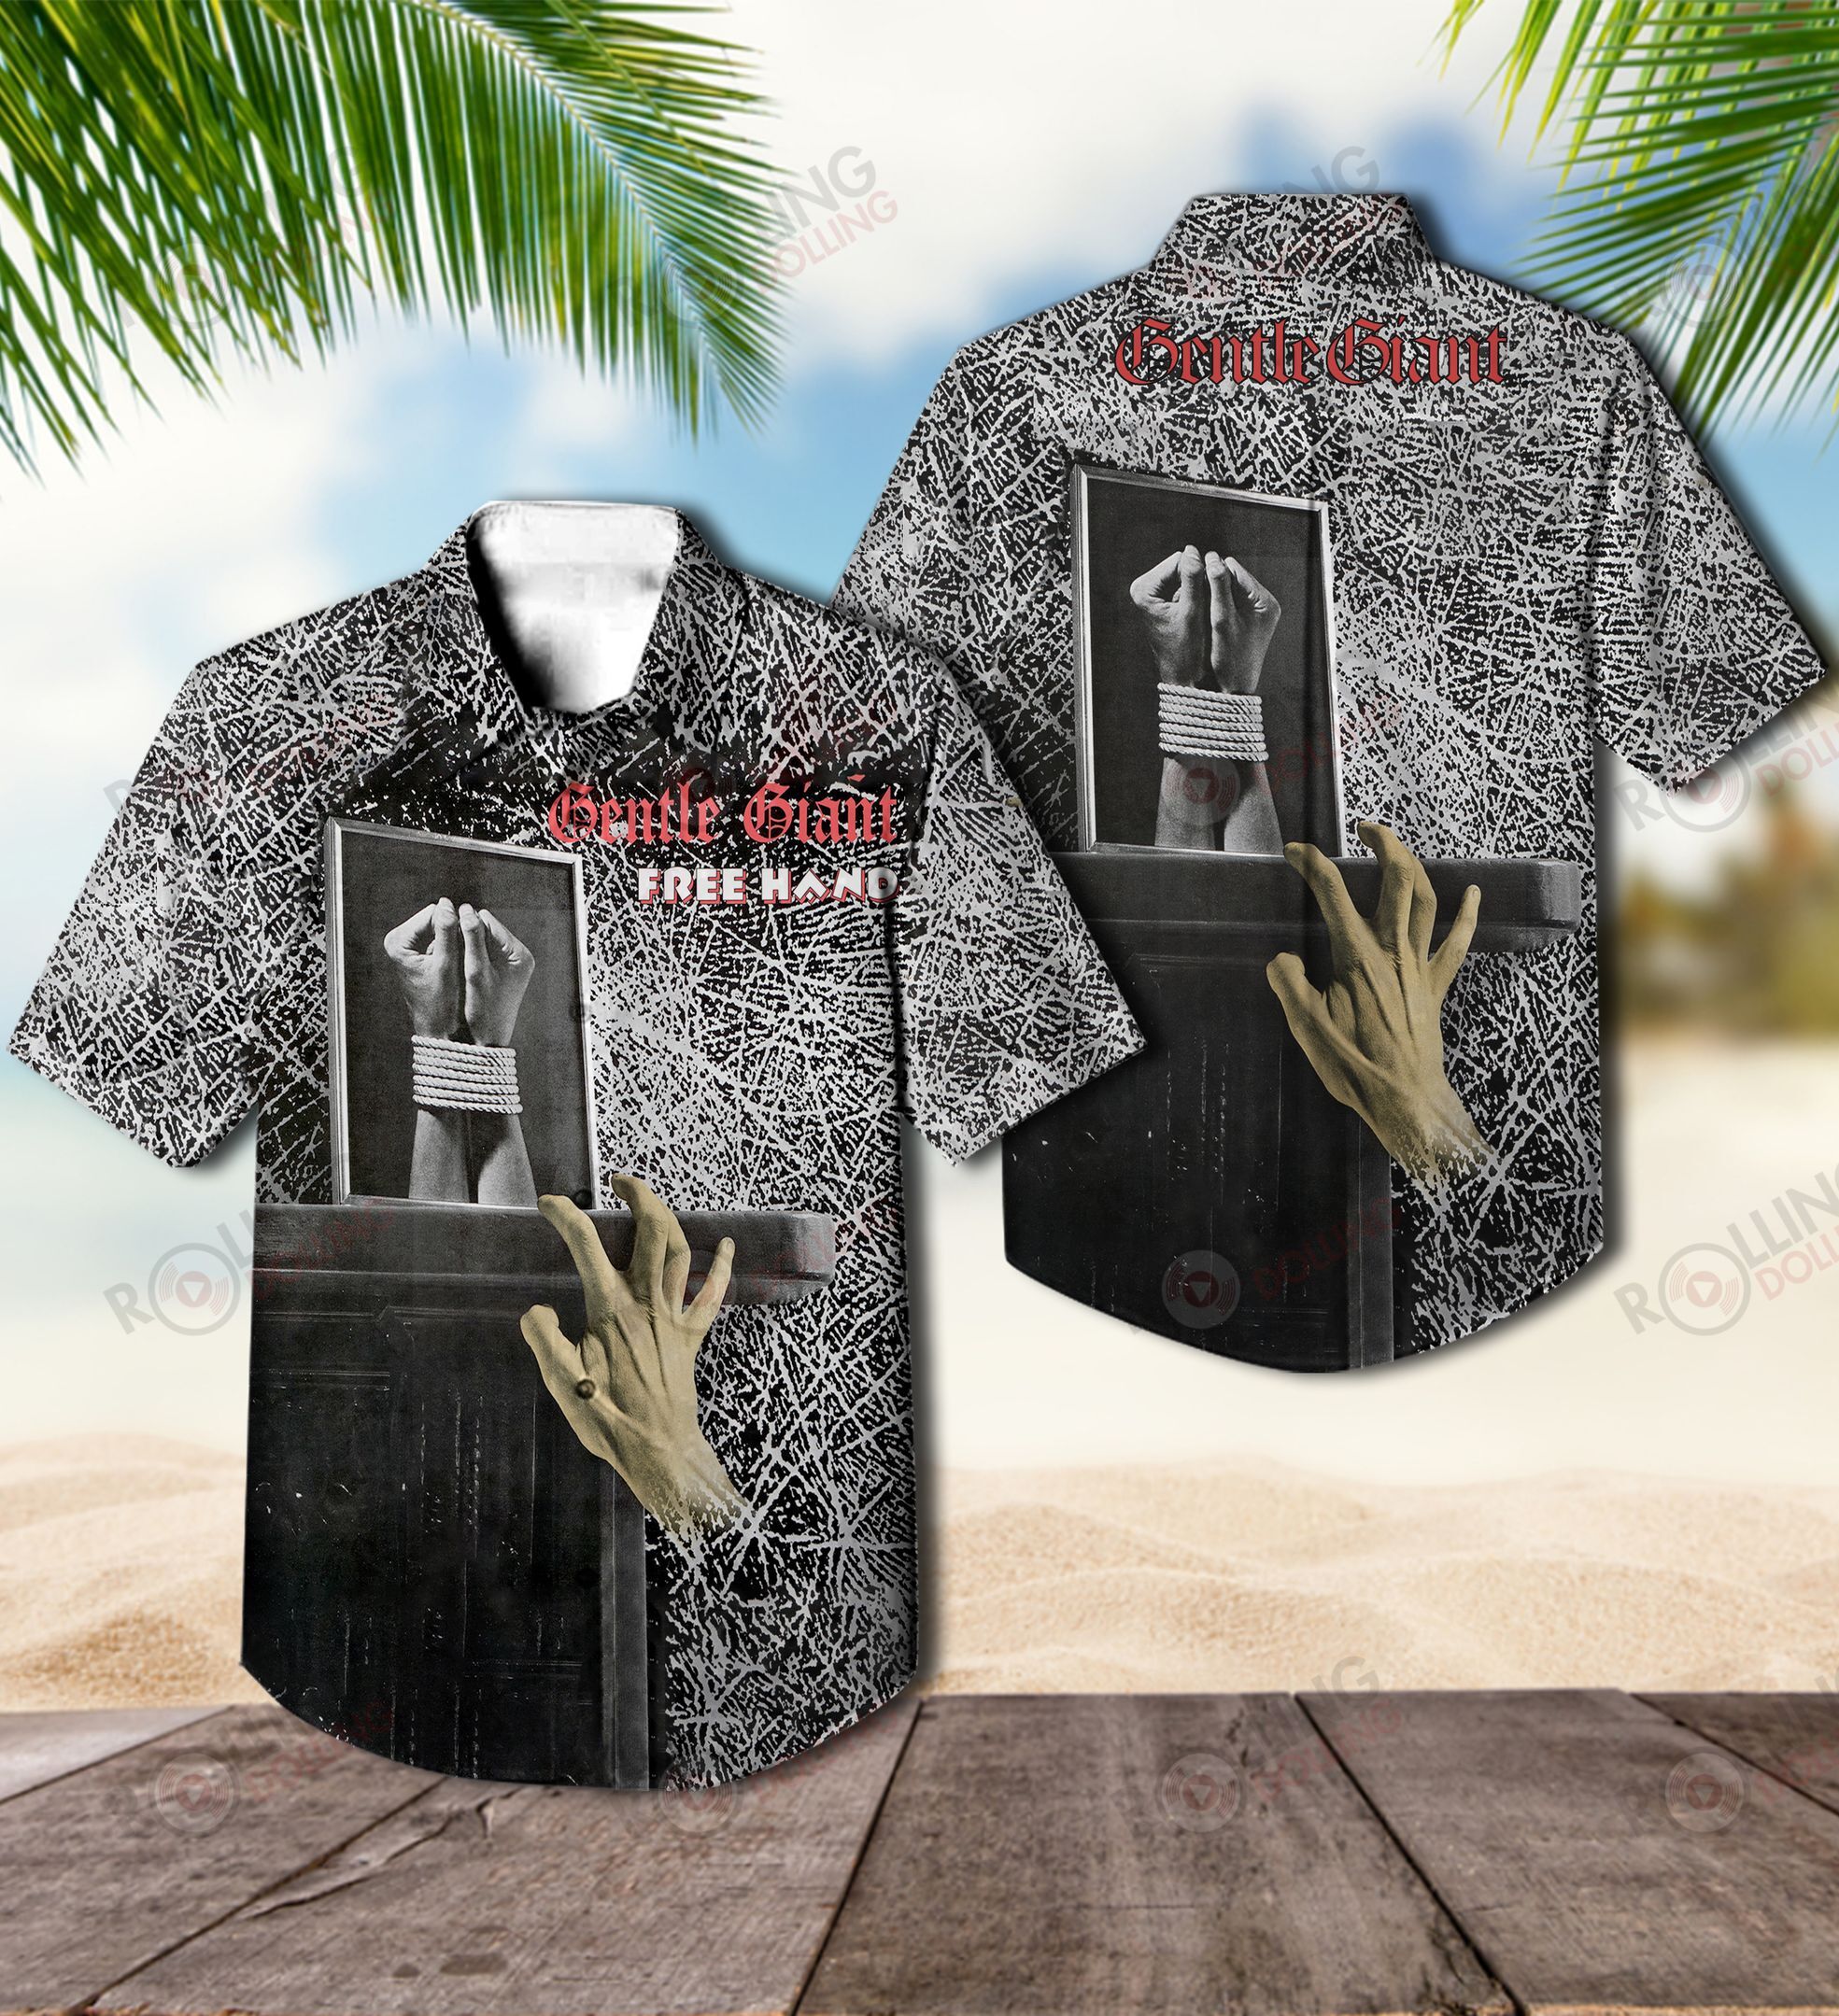 You'll have the perfect vacation outfit with this Hawaiian shirt 137